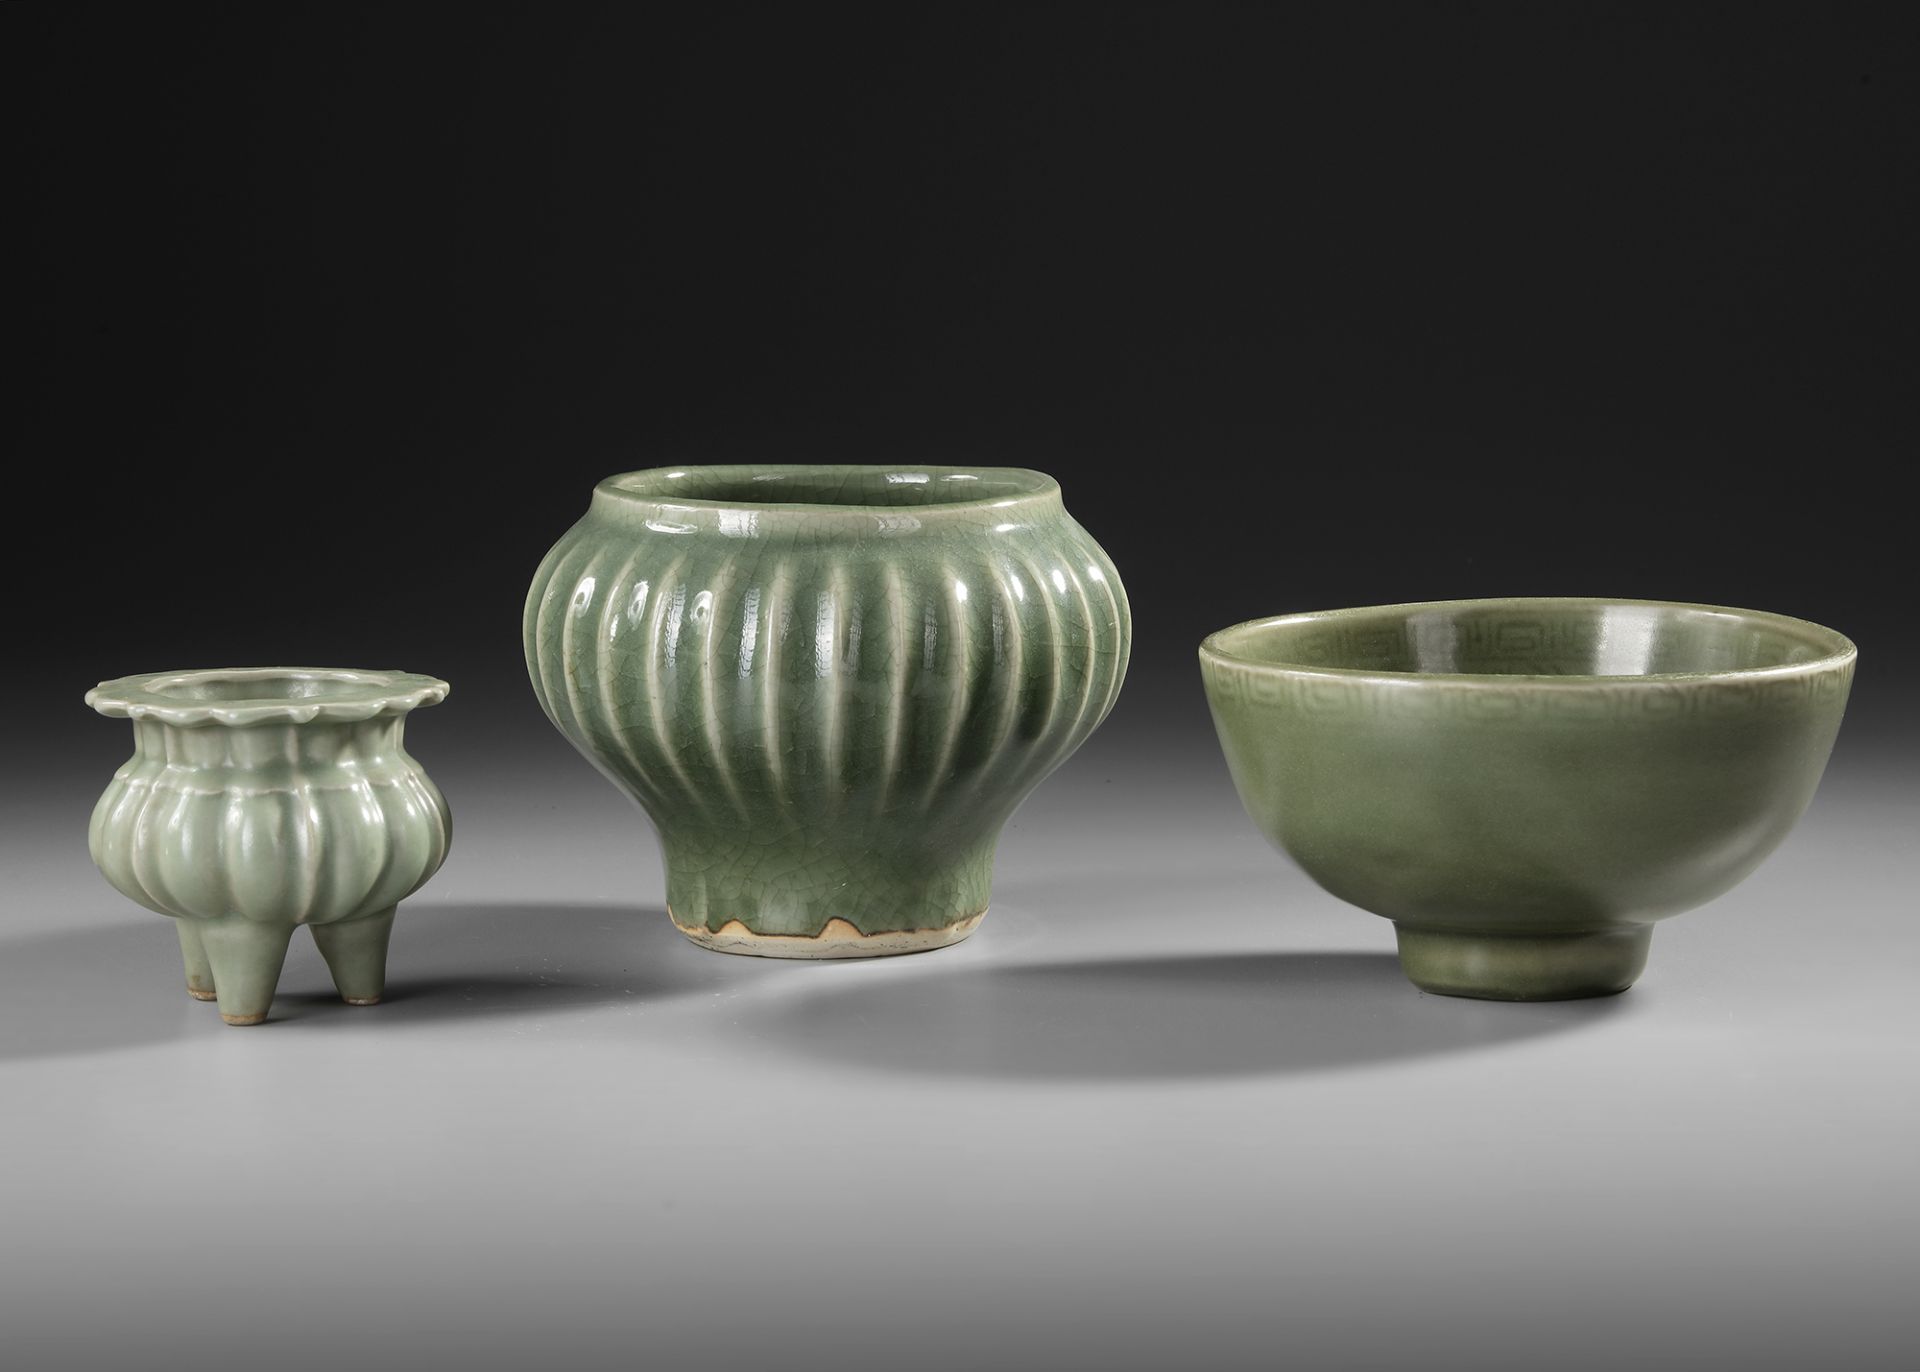 THREE CHINESE CELADON WARES, SONG DYNASTY (960-1127 AD) /MING DYNASTY (1368-1644)